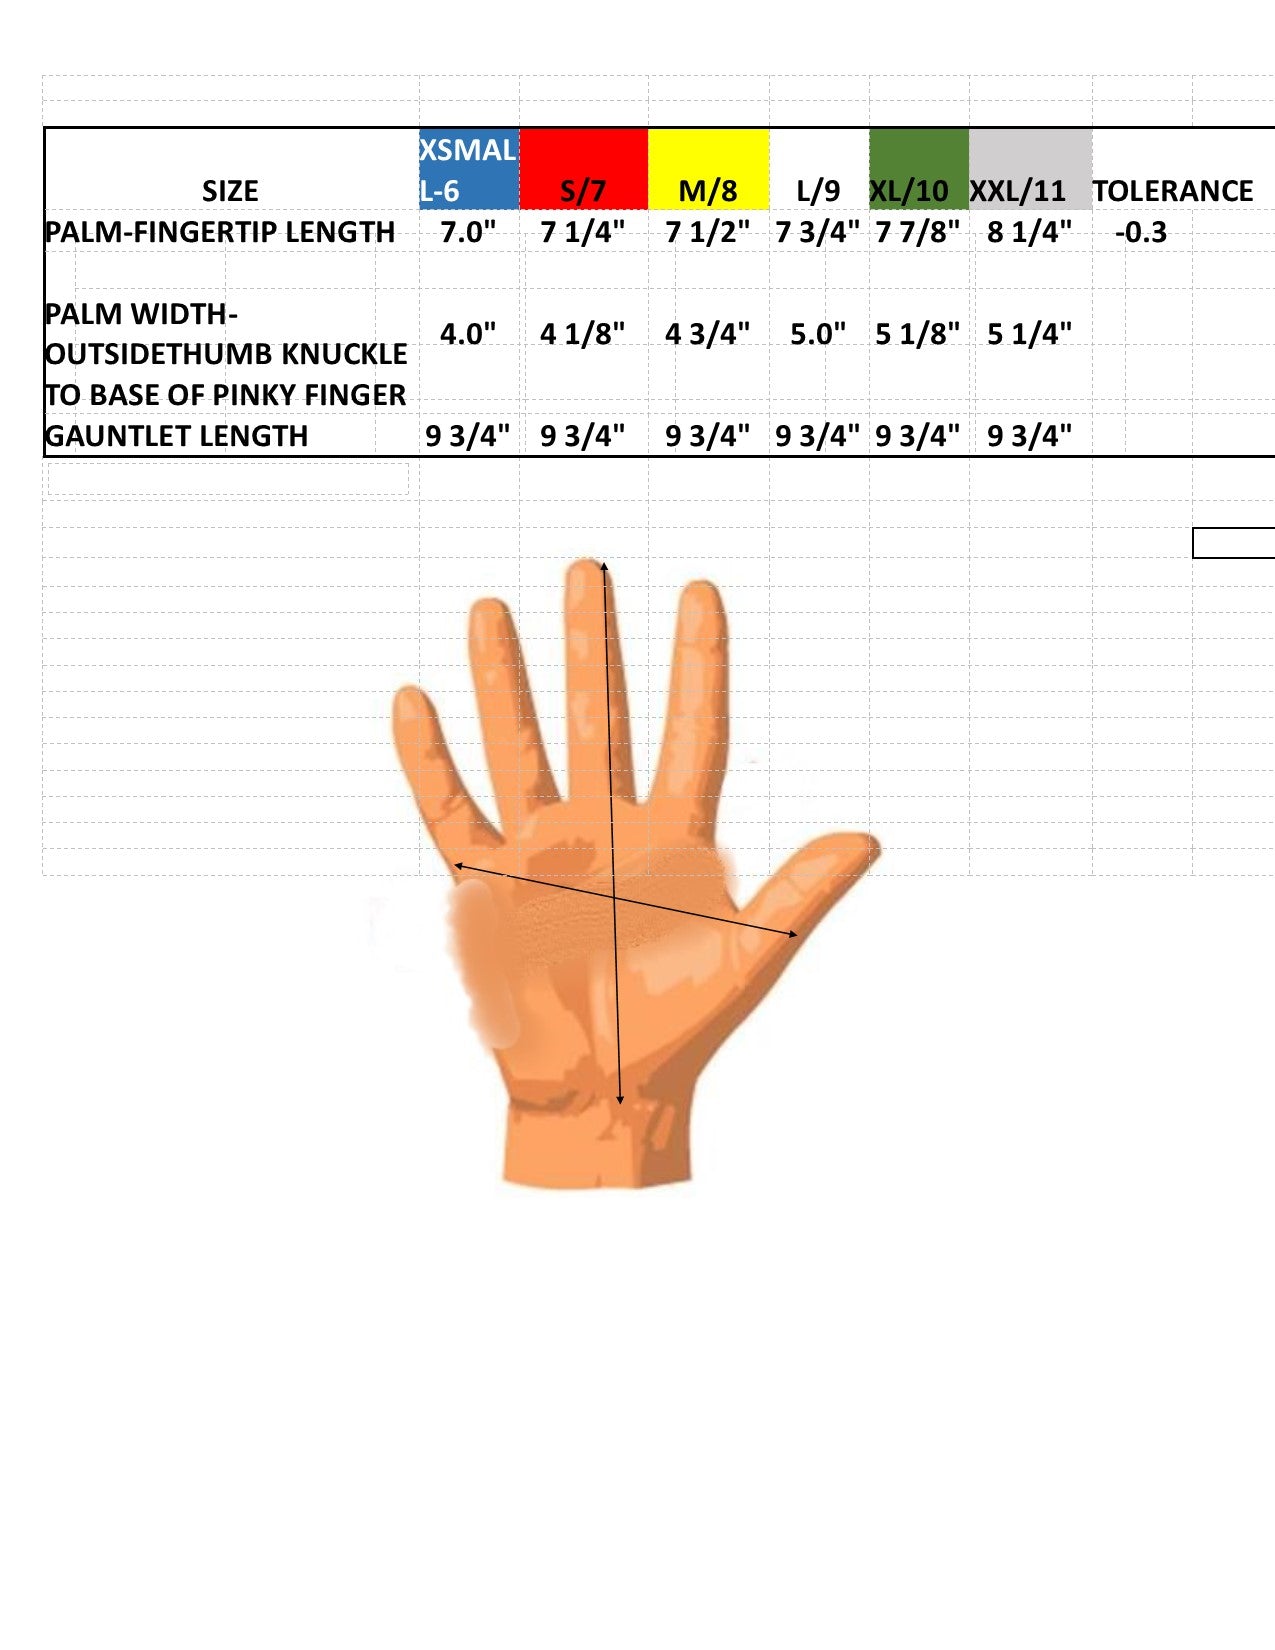 Goatskin Gardening Gloves Sizing Chart to assist in selection